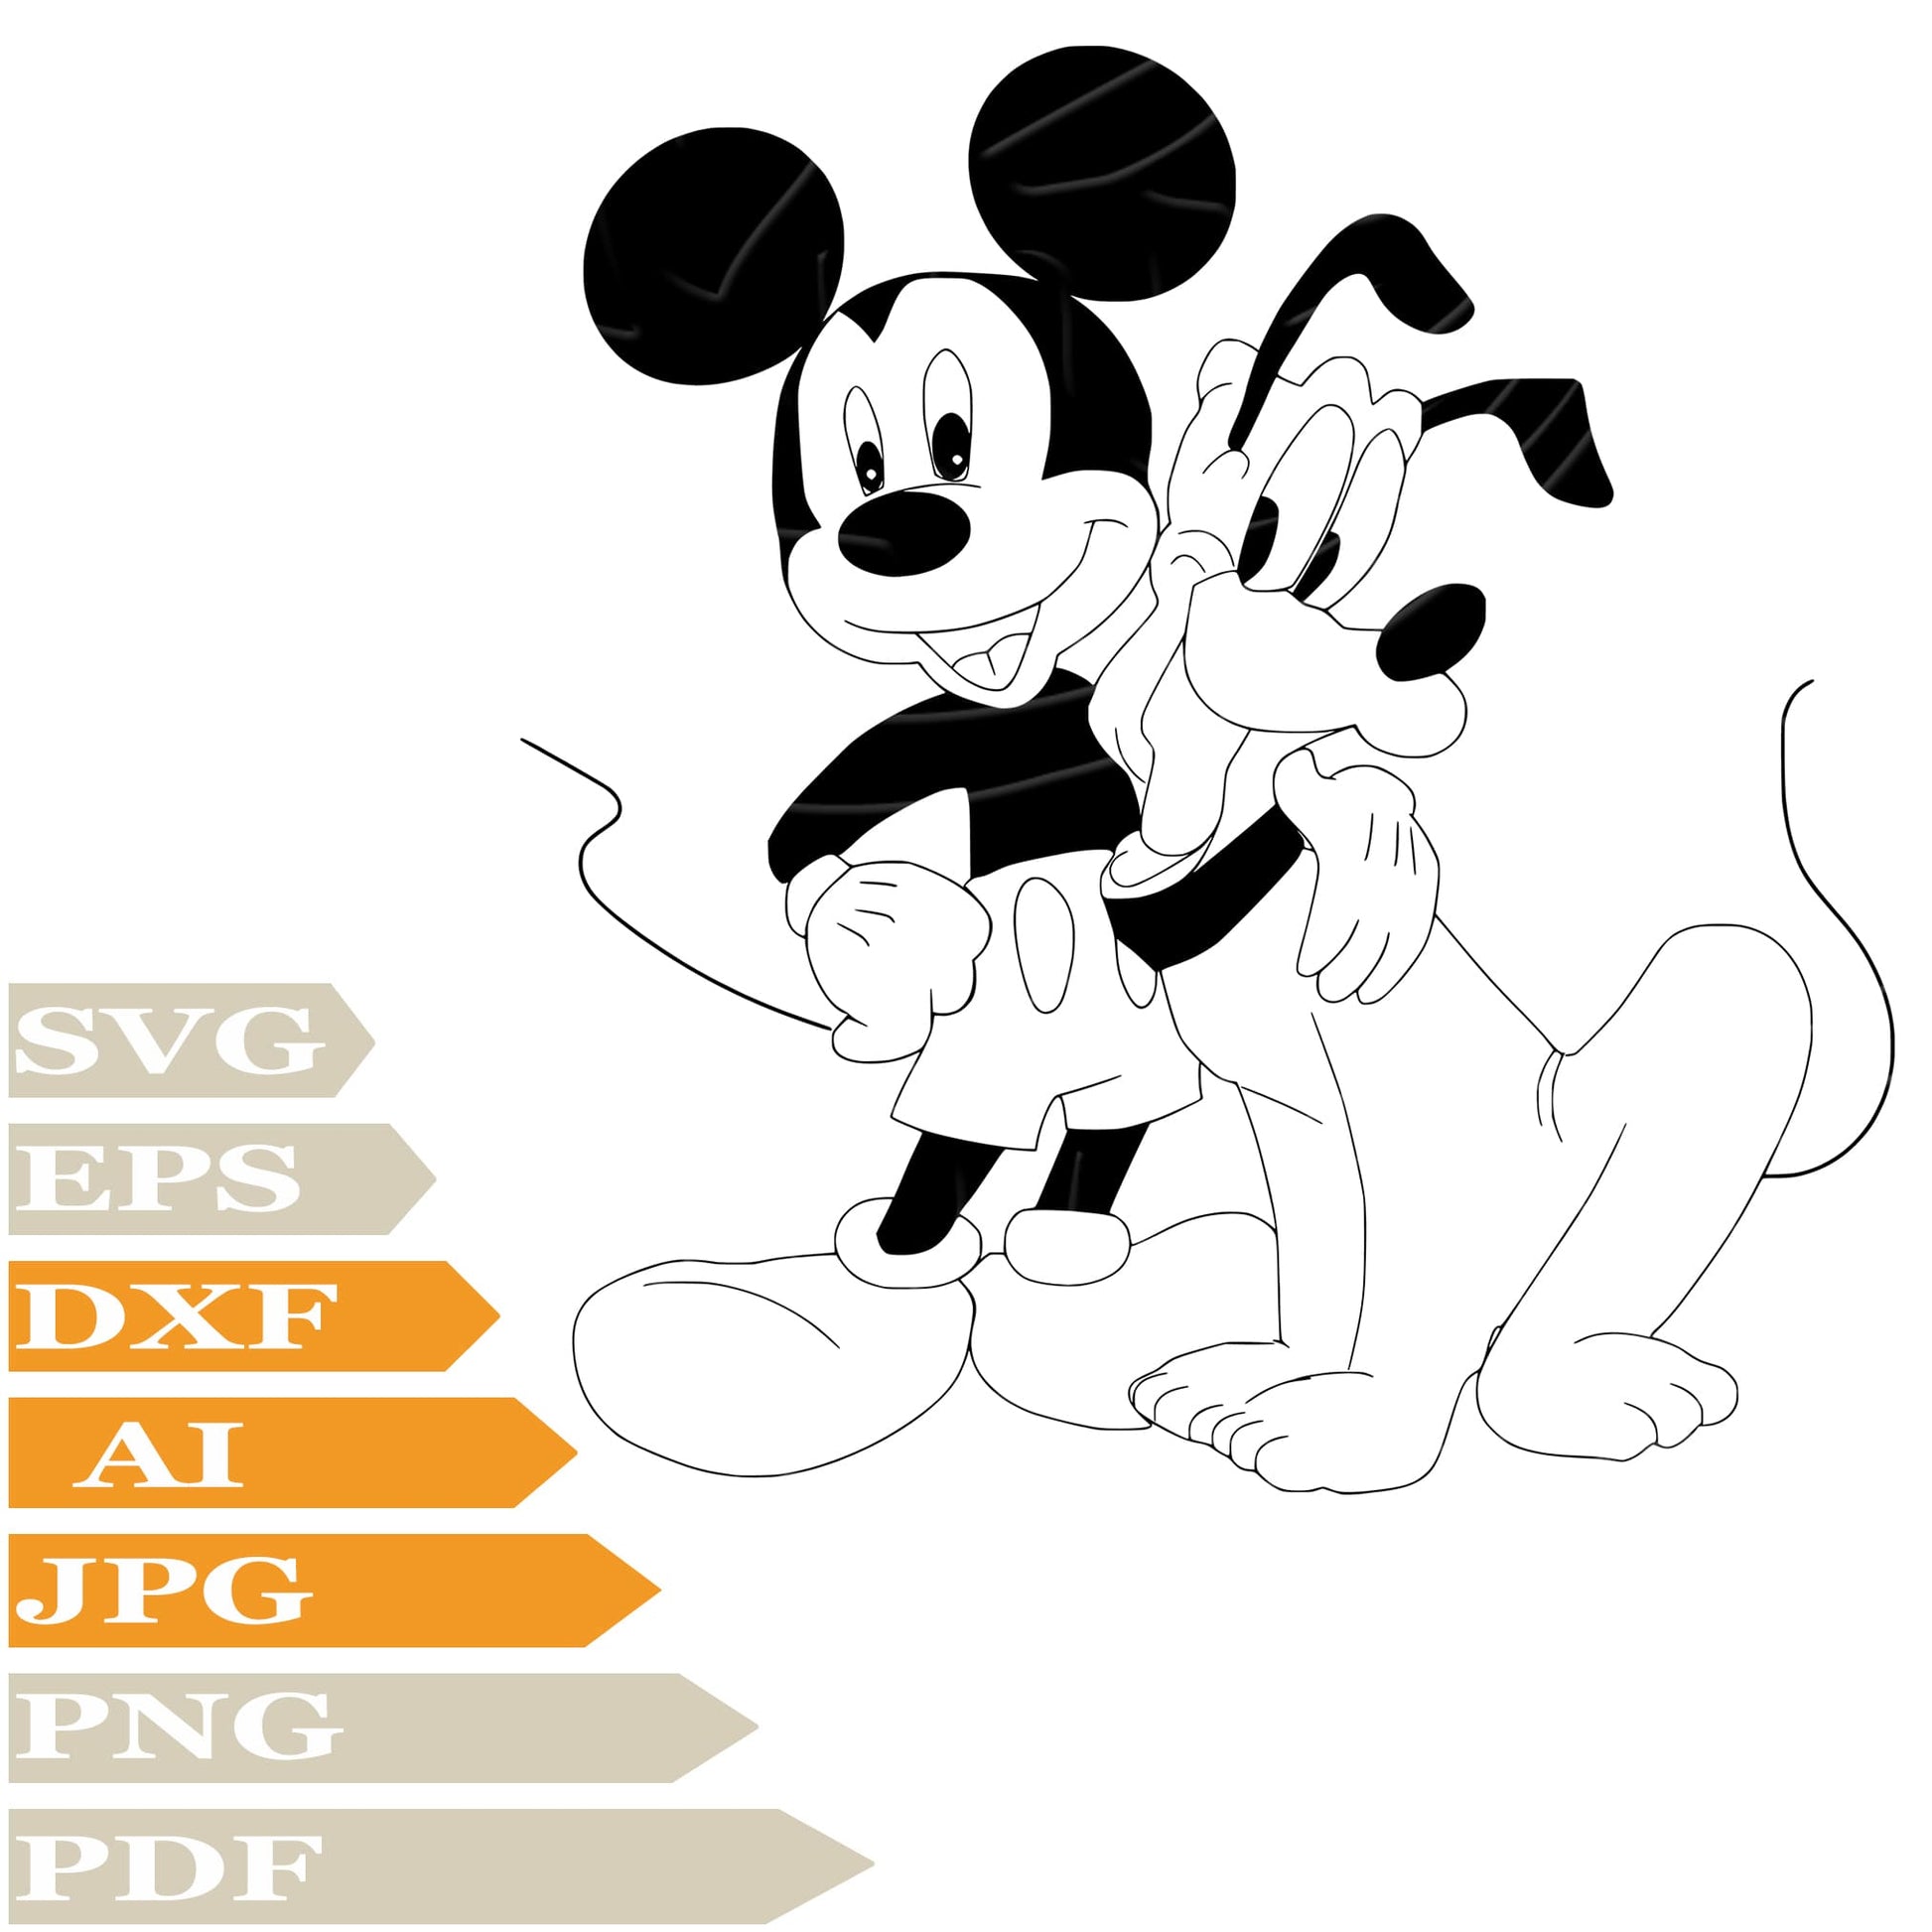 Mickey Mause ﻿SVG, Pluton SVG Design, Mickey Pluto PNG, Mickey Pluto Vector Graphics, Dog Pluto Mickey Mause For Cricut, Digital Instant Download, Clip Art, Cut File, For Shirts, Silhouette